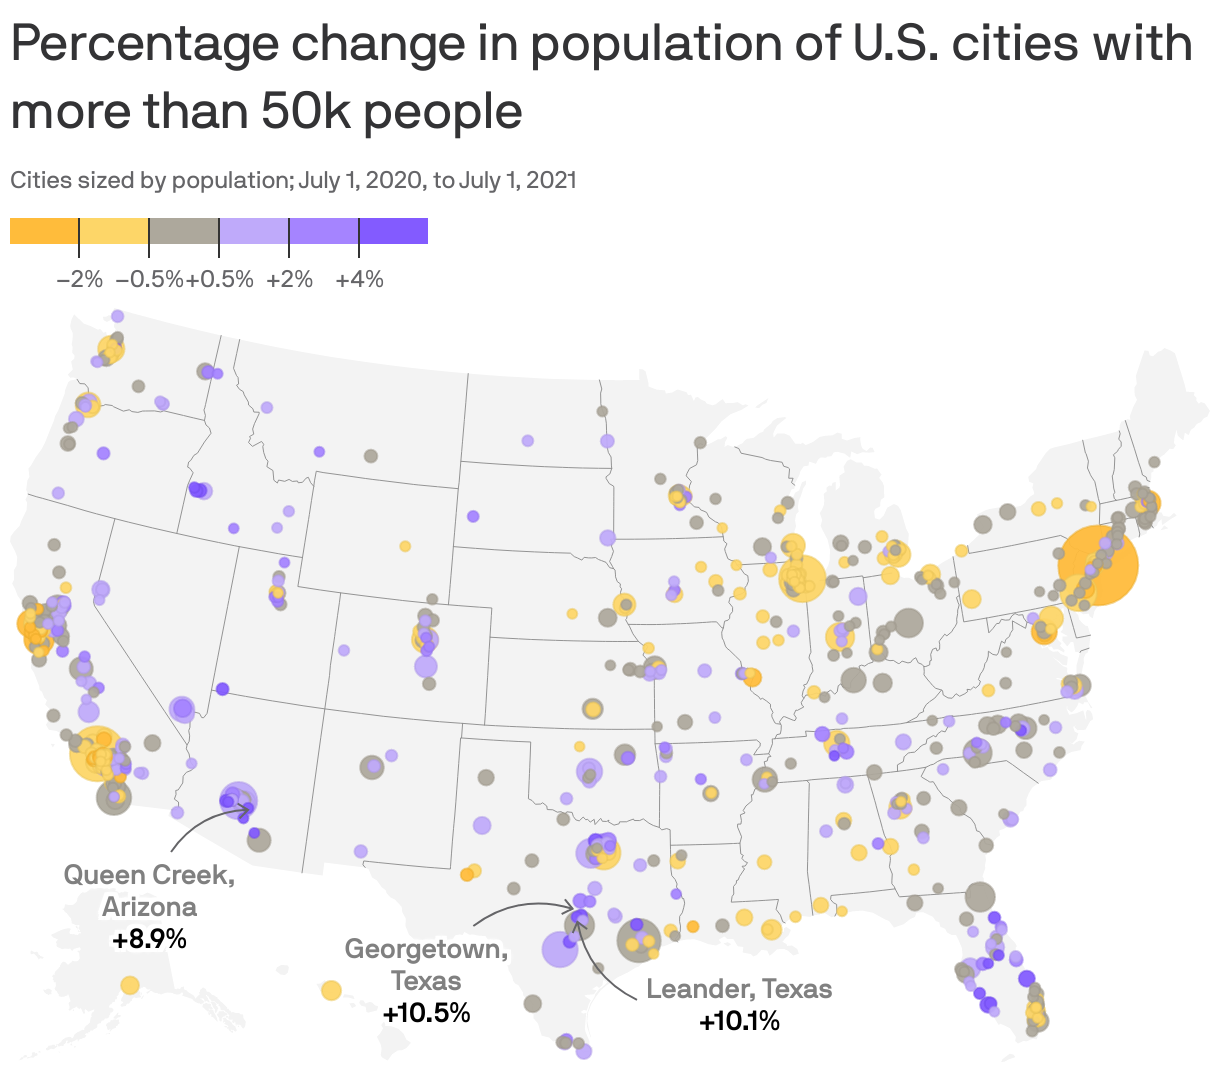 Percentage change in population of U.S. cities with more than 50k people 